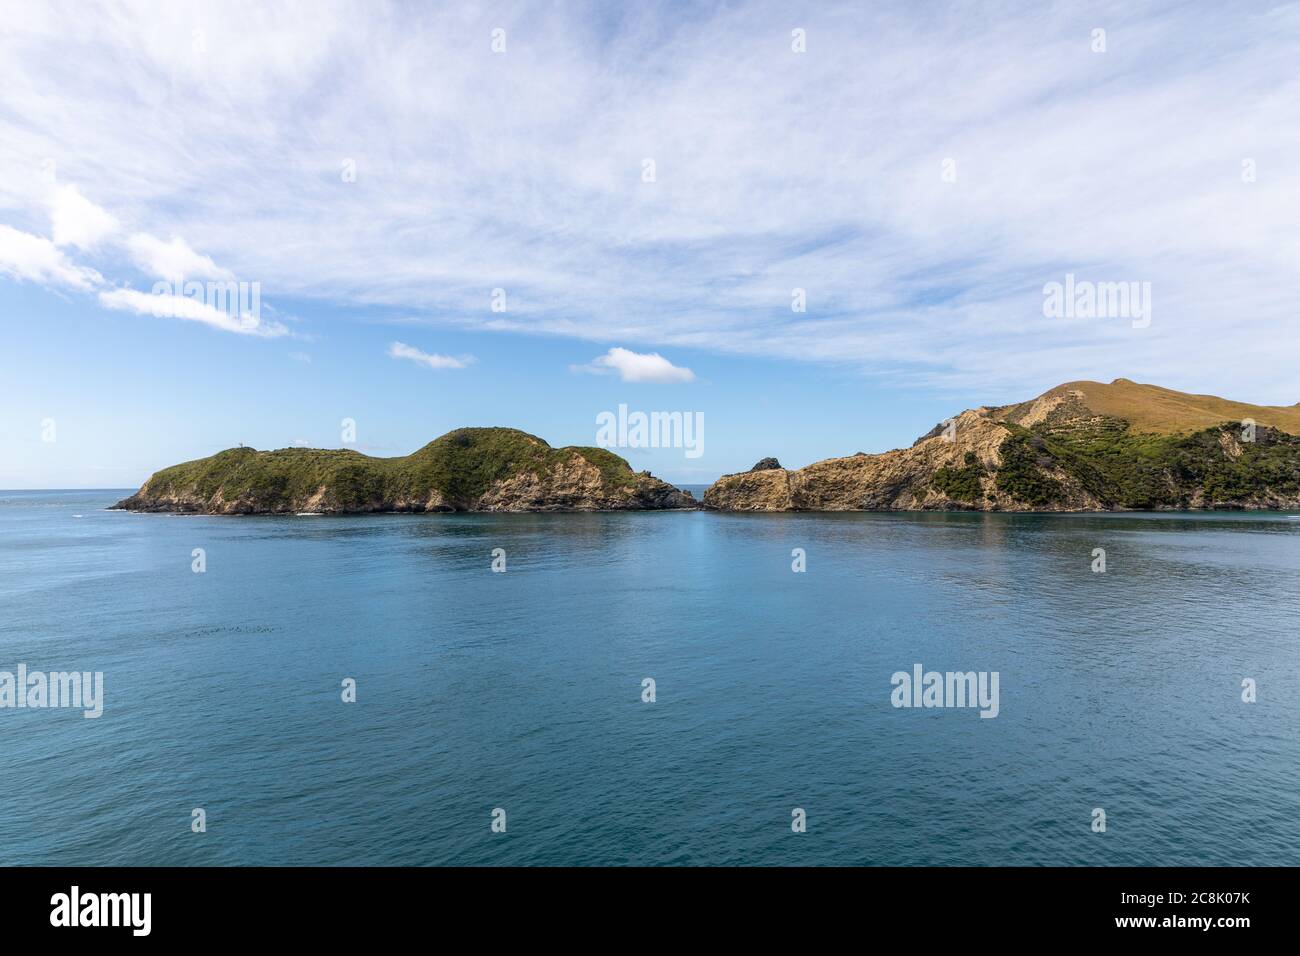 View from the Inter-Island ferry of a couple of islands in the Cook Strait in New Zealand. Stock Photo